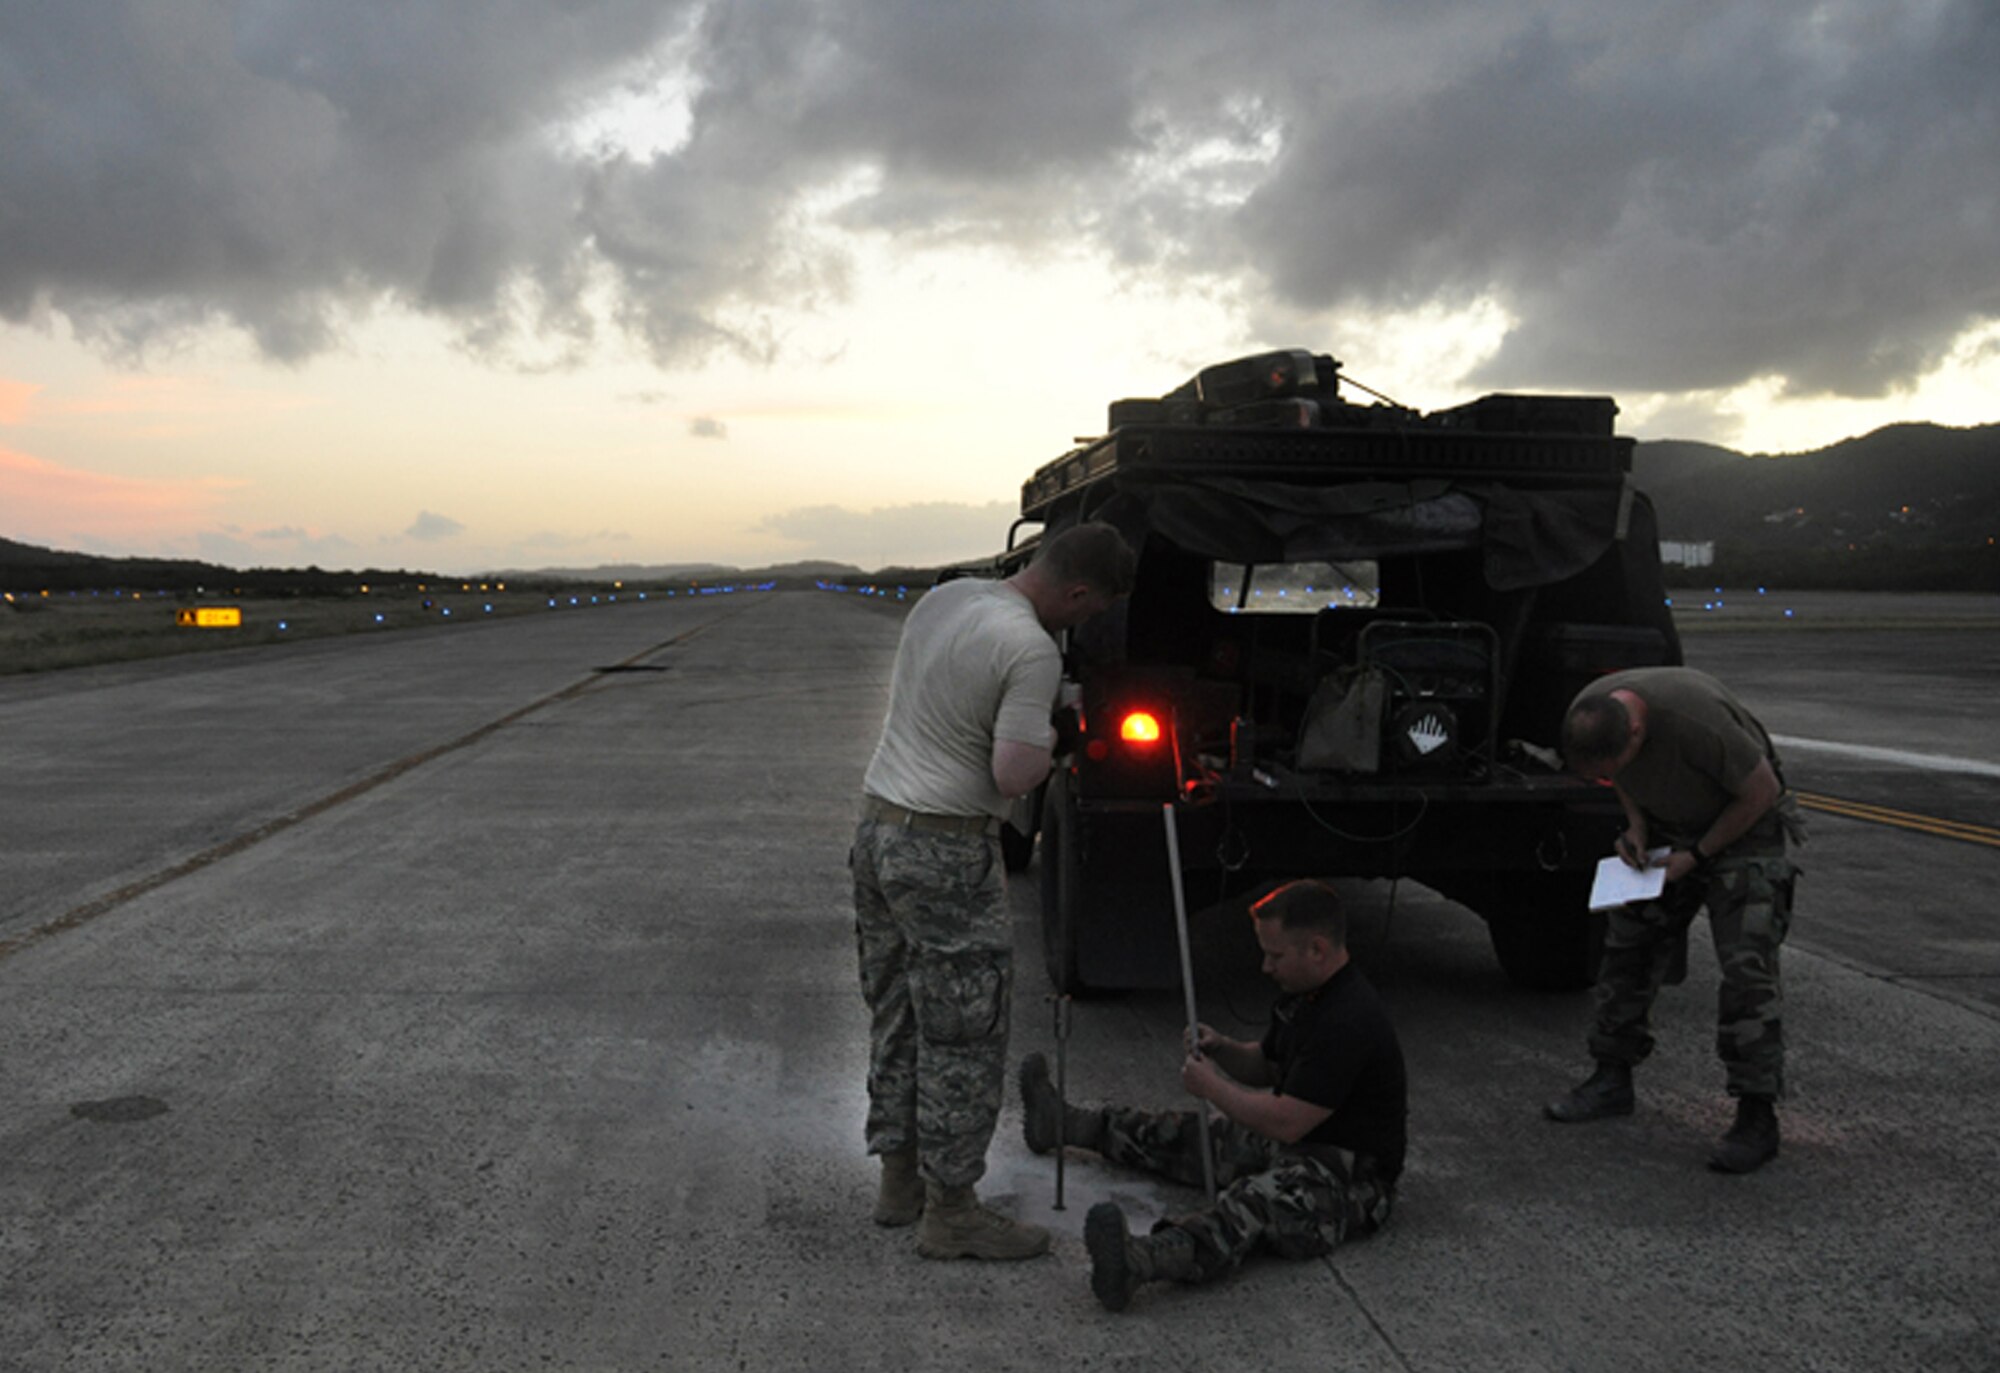 Capt. Brian Loveless (from left), Staff Sgt. Joseph Reed and Capt. Luke Stumme, members of the 817th Contingency Response Group's "Alpha Mike" airfield assessment team, conduct density tests on soil beneath a runway during the Vigilant Guard exercise in Puerto Rico March 23 to 29. The completed assessment will be used "real-world" to certify the runway for use by various mobility aircraft.  The 817th CRG is part of the 621st Contingency Response Wing at McGuire Air Force Base, N.J.  (U.S. Air Force photo/1st Lt. Dustin Doyle) 